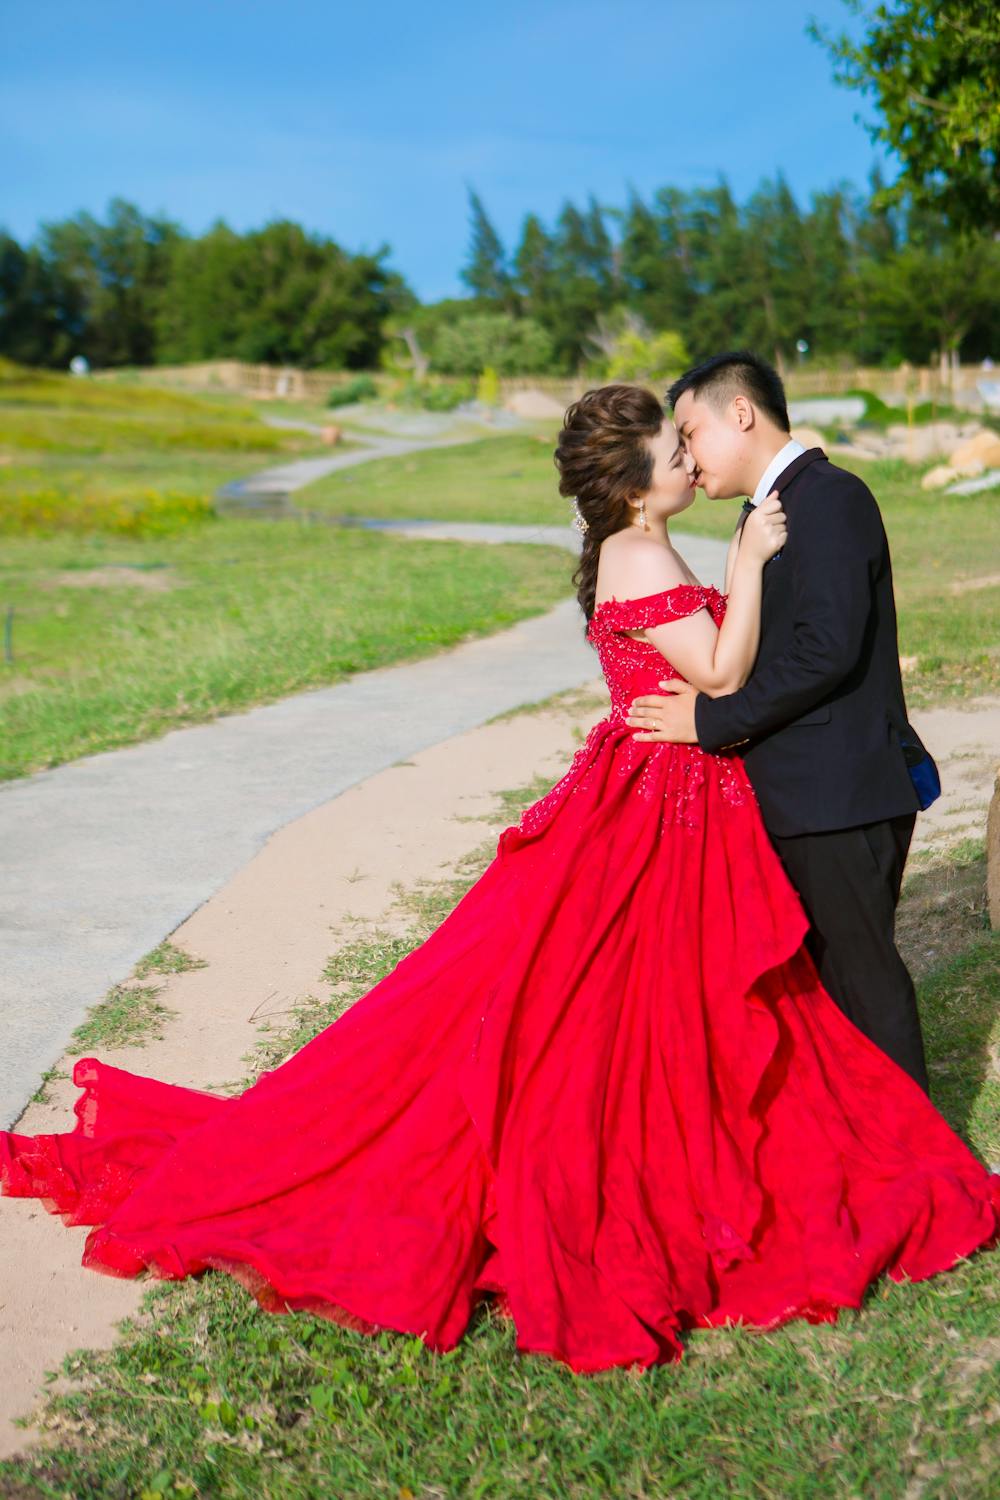 Can you wear red to a wedding? wedding dress